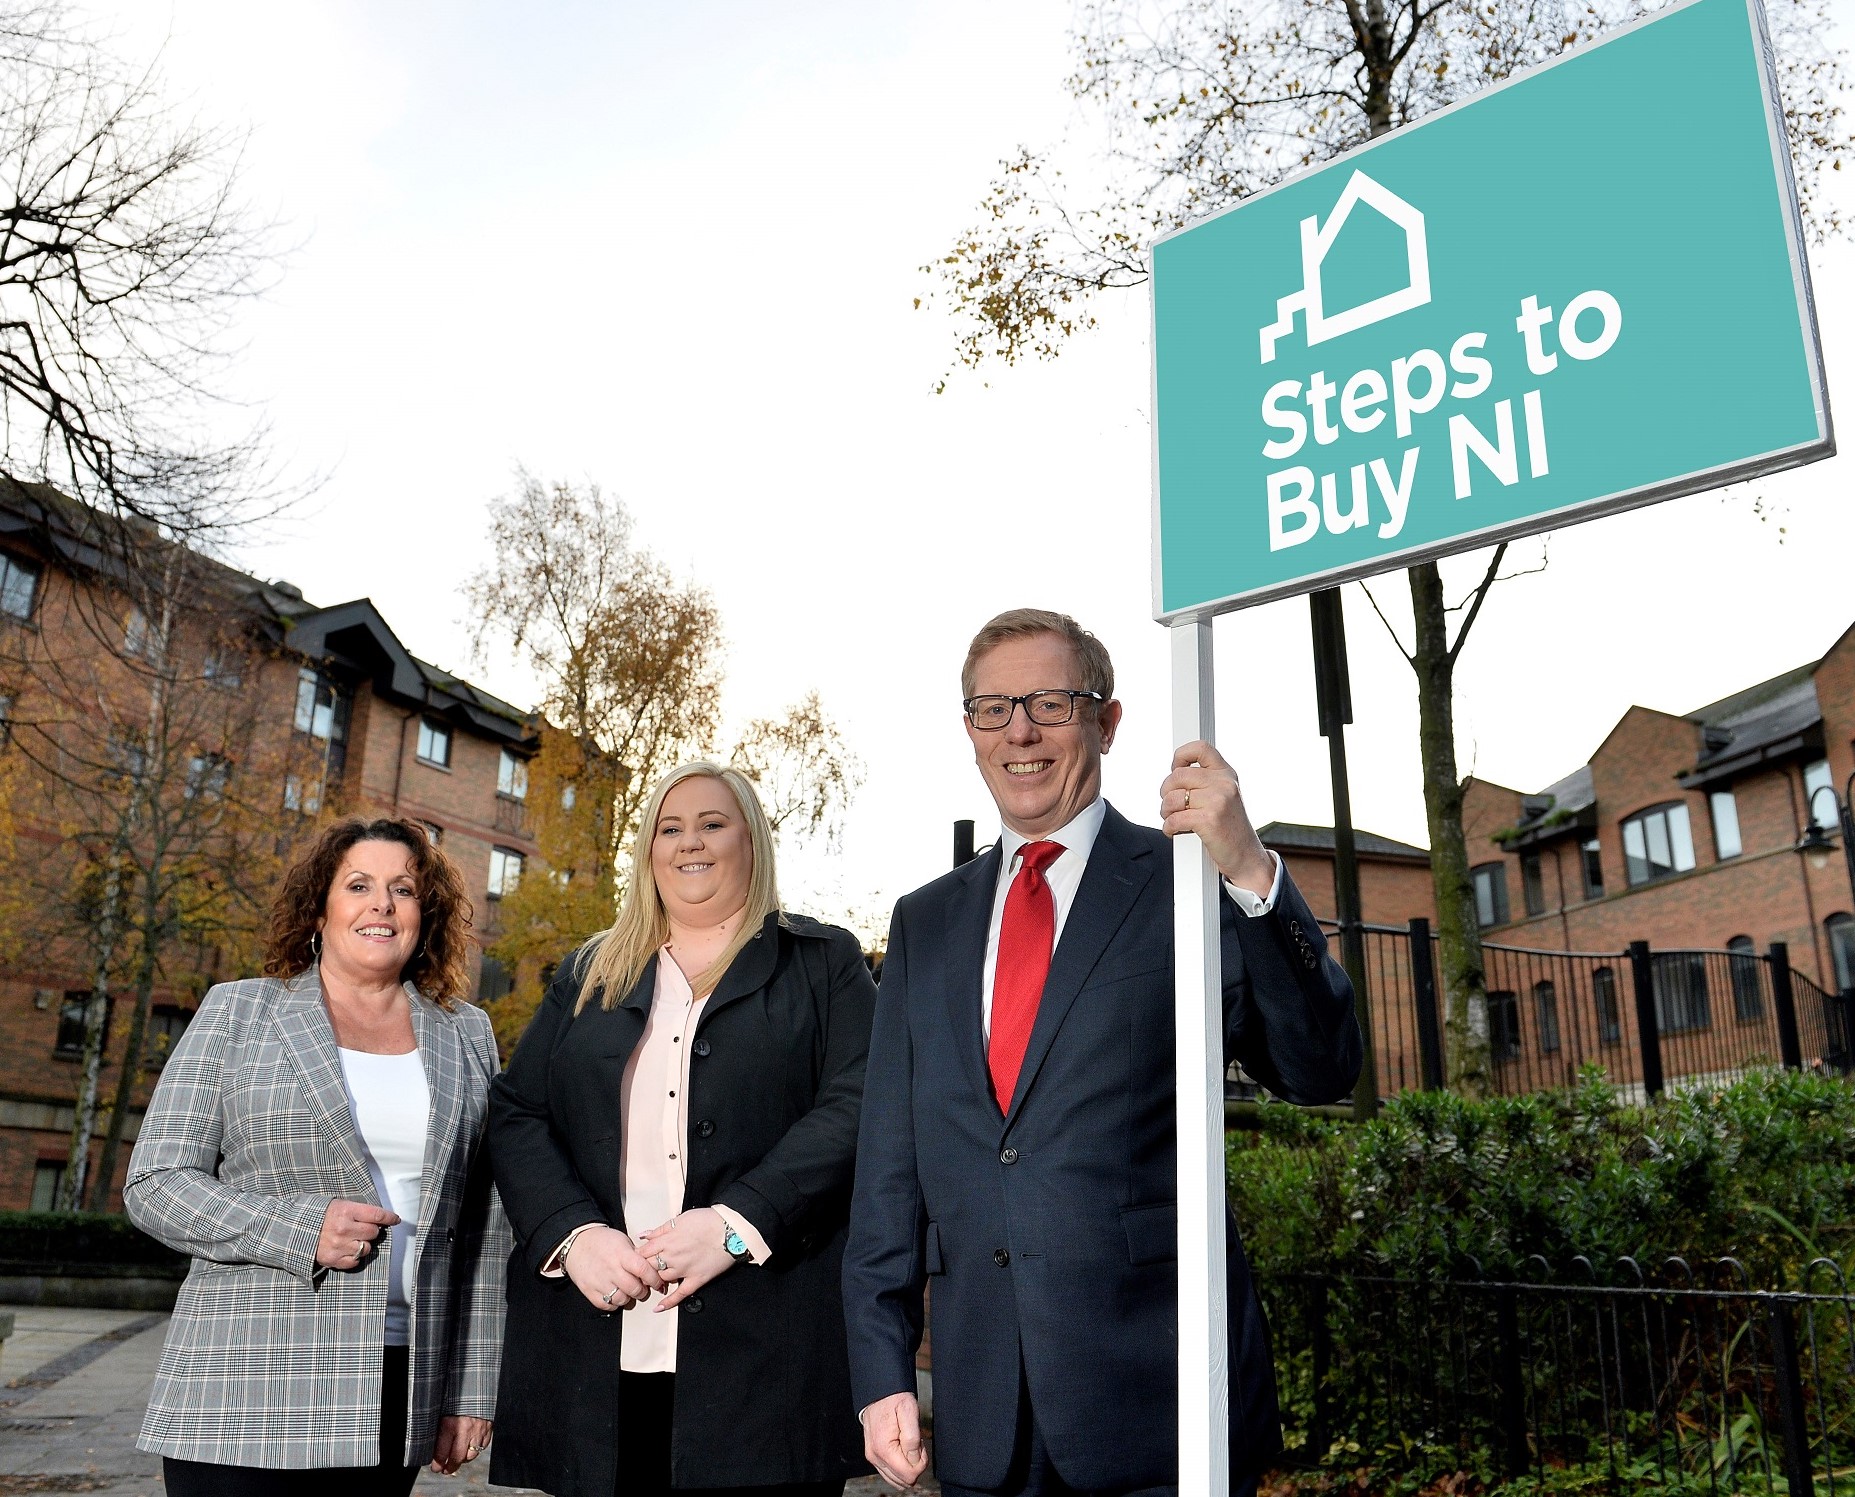 New campaign launched to support homebuyers and homeowners